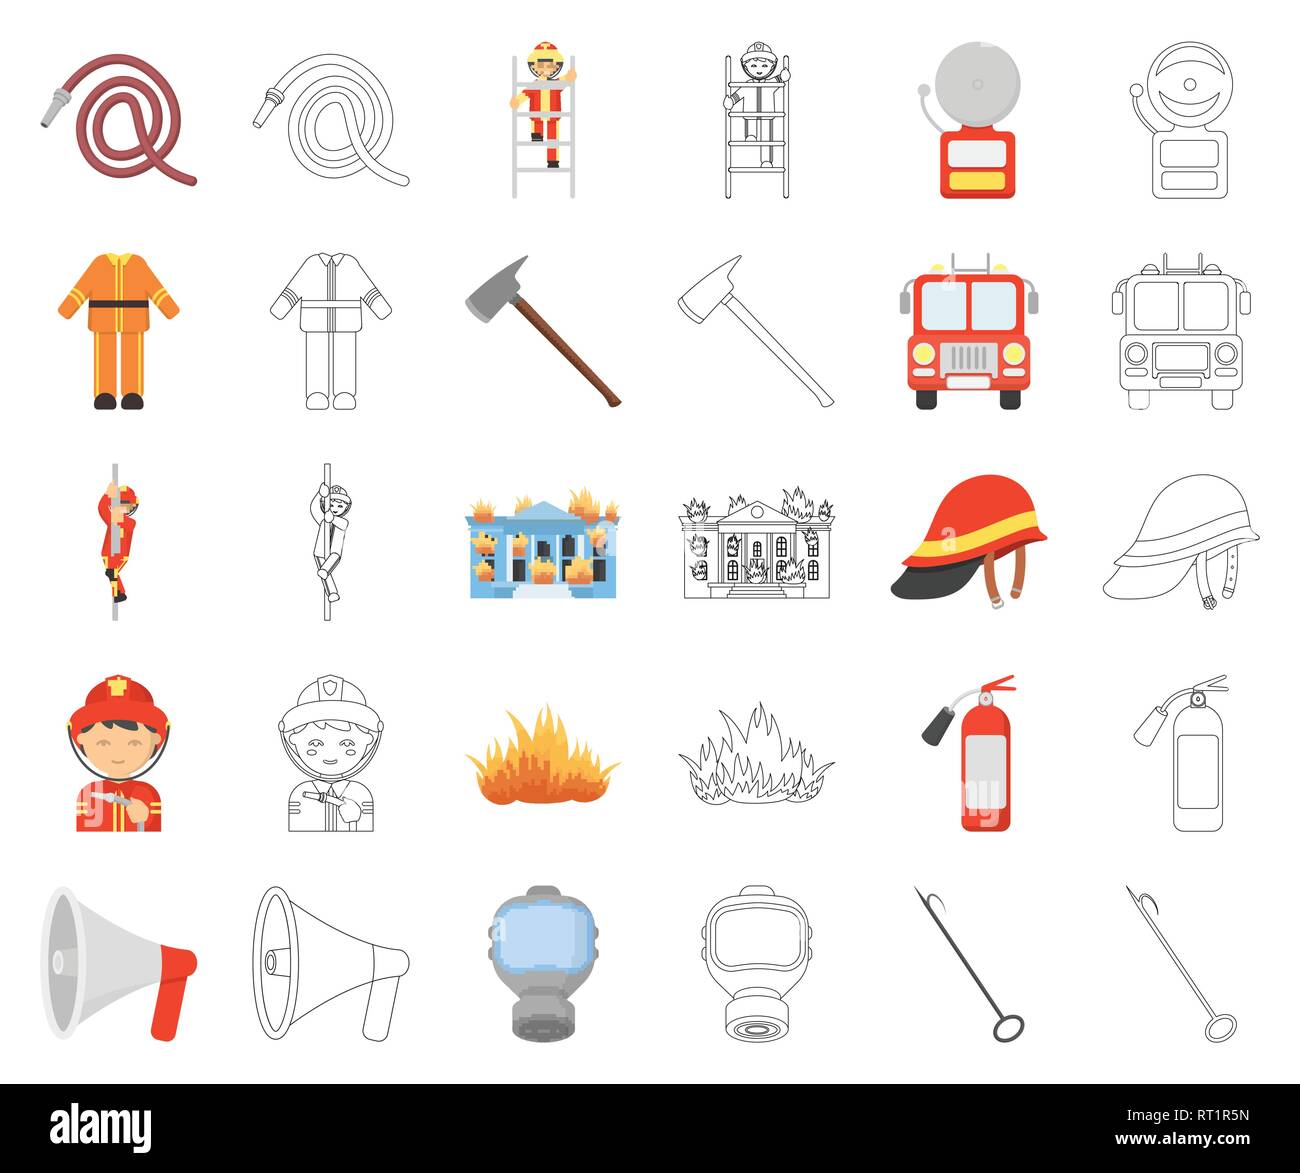 accessories,apparatus,art,attribute,axe,bucket,building,bunker,cartoon,outline,collection,conical,department,design,equipment,extinguishing,extingushier,fire,firefighter,firefighting,flame,gas,gear,helmet,icon,illustration,isolated,logo,mask,organization,pike,pole,pump,ring,separation,service,set,sign,slide,symbol,tools,vector,web Vector Vectors , Stock Vector